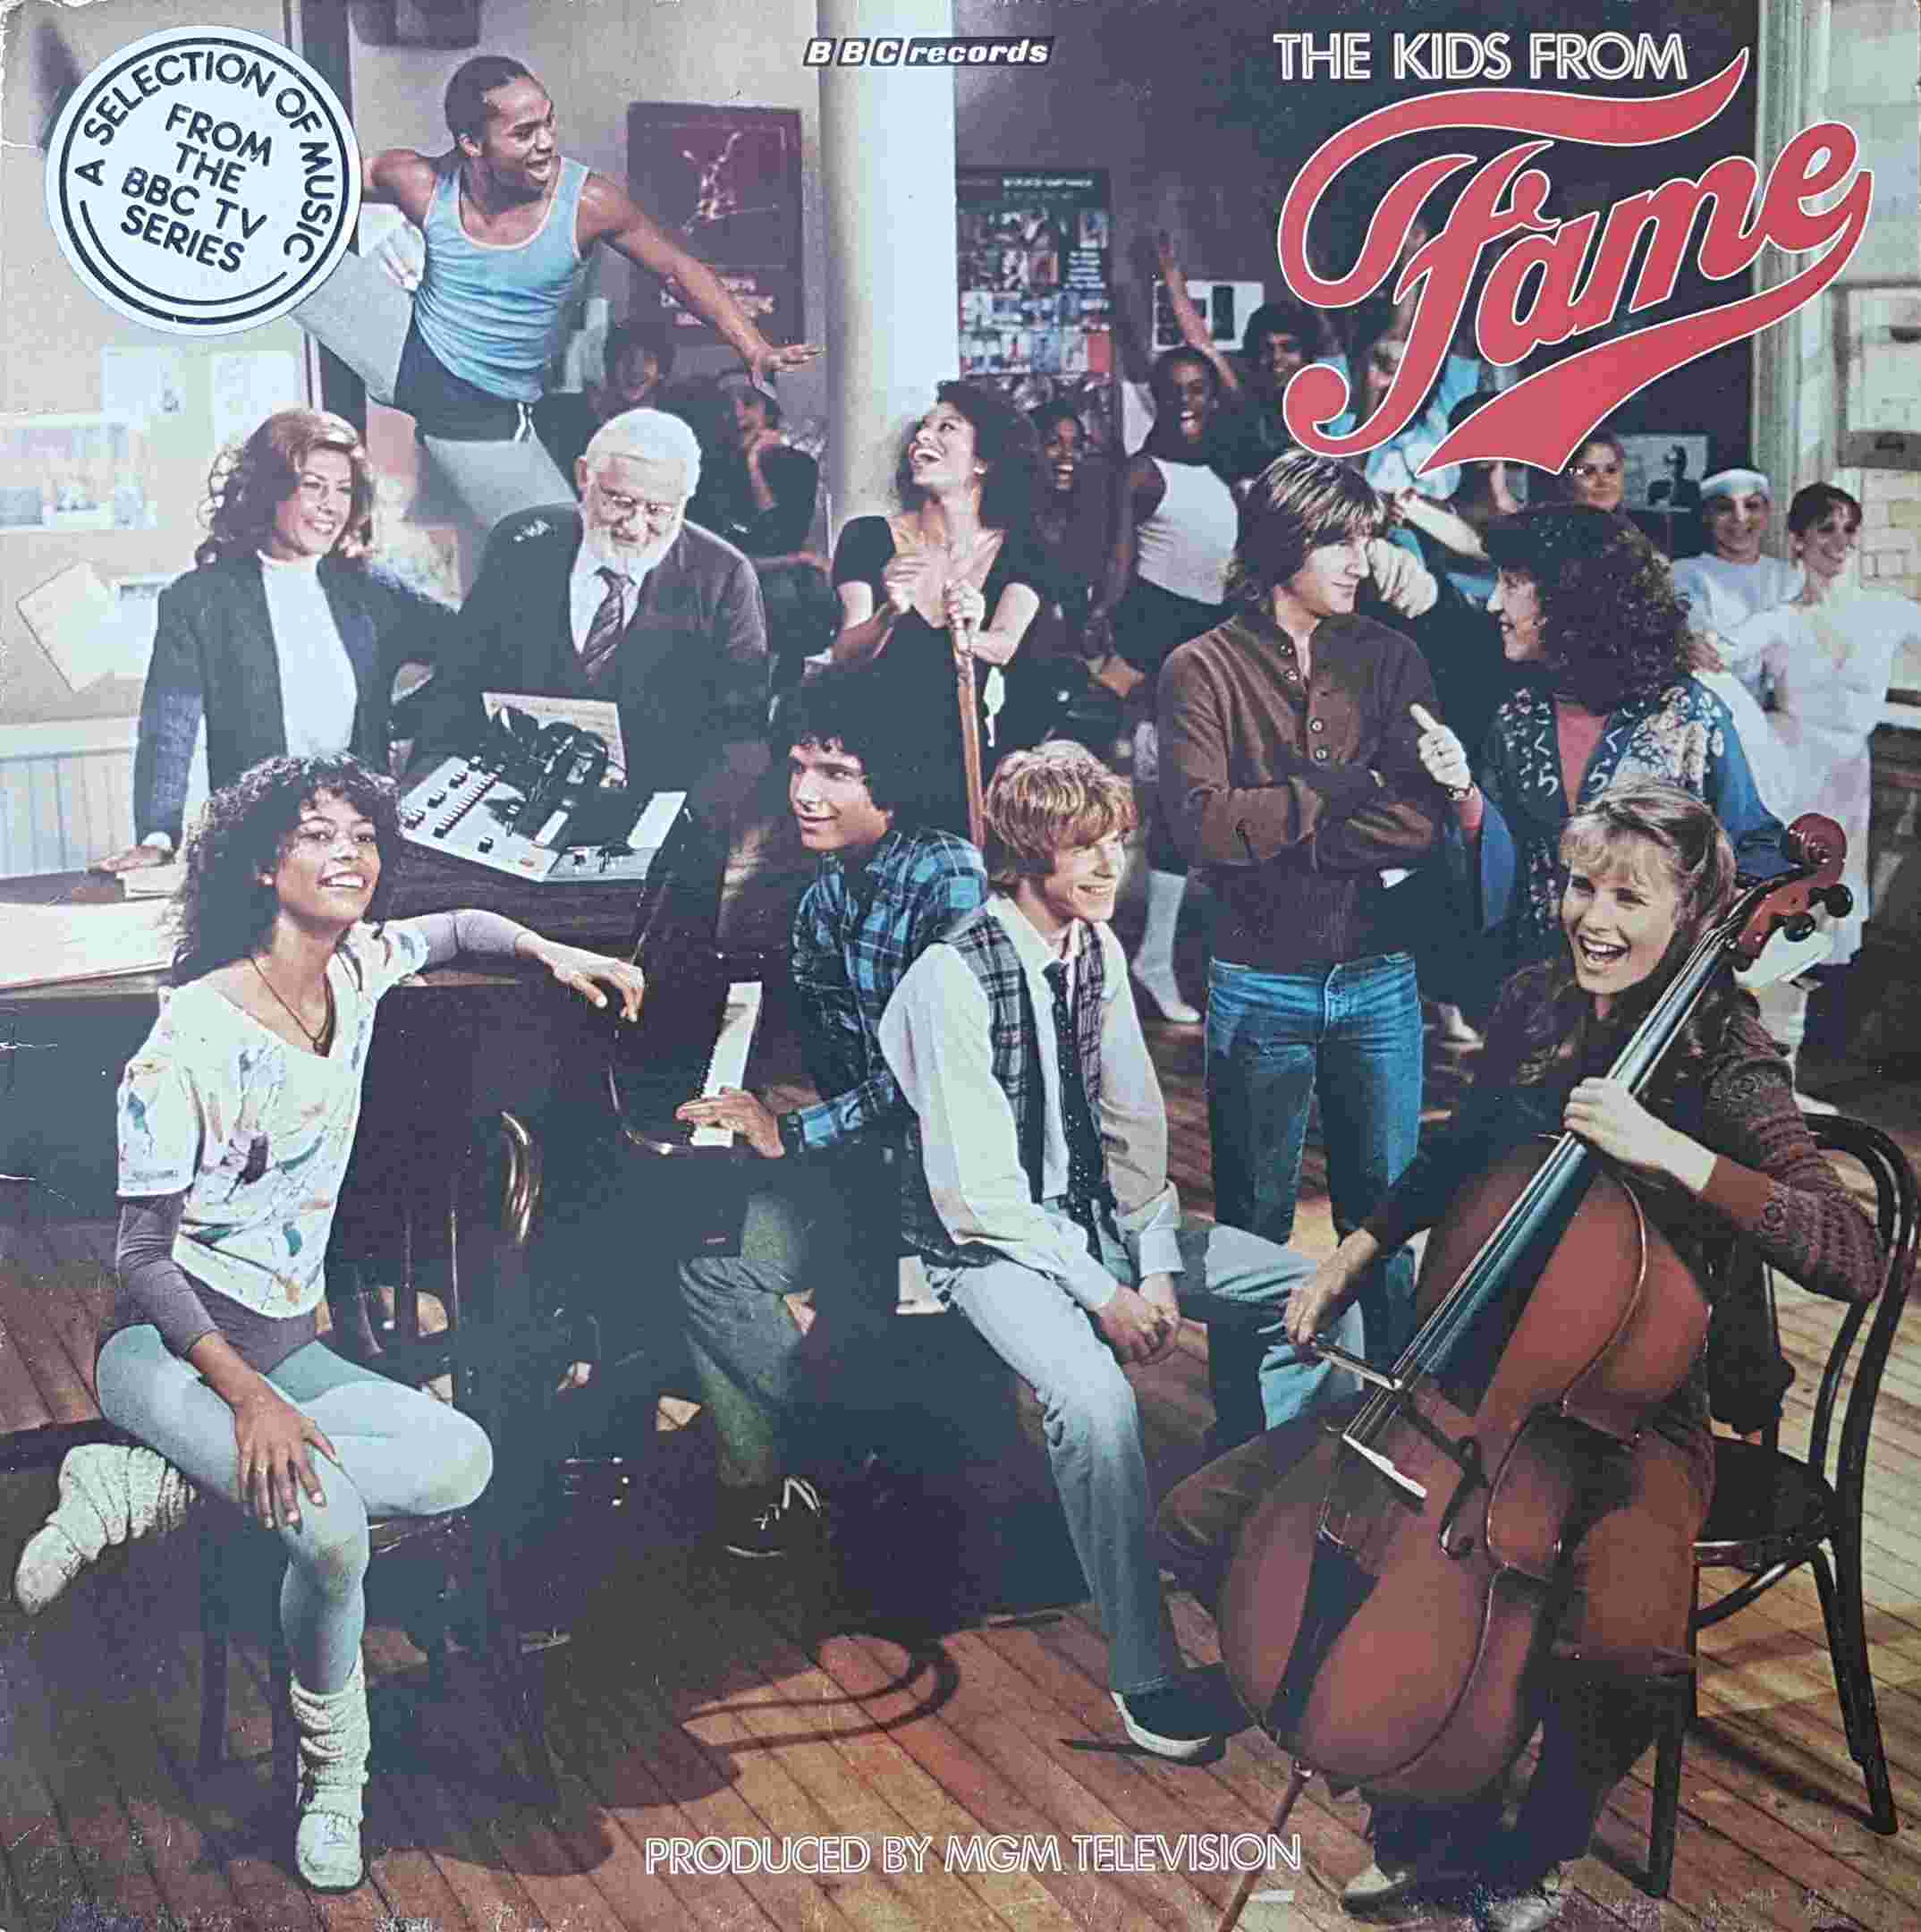 Picture of REP 447 The kids from fame by artist Various from the BBC albums - Records and Tapes library